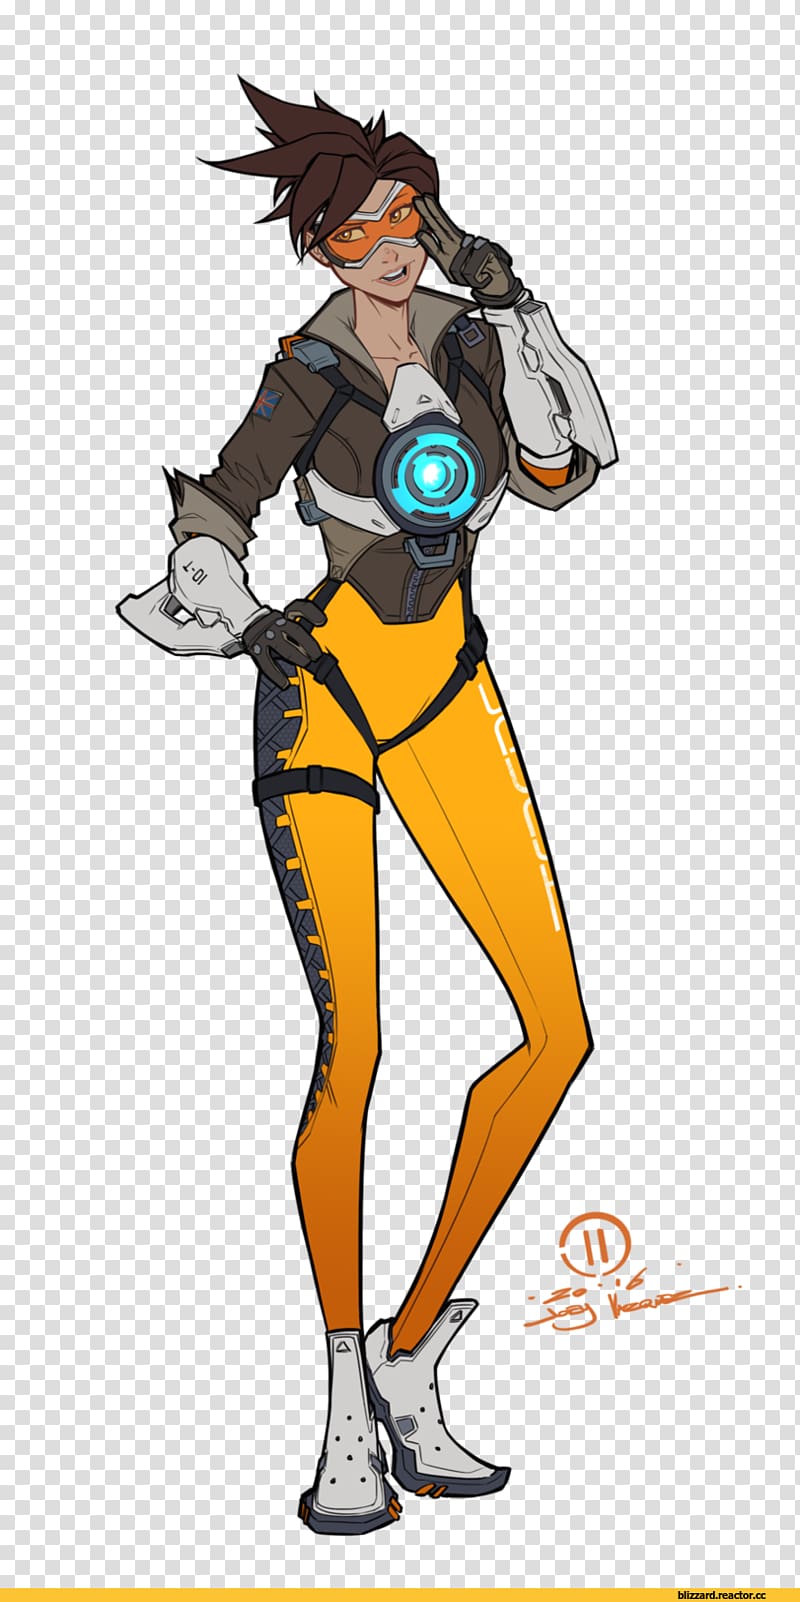 Overwatch Tracer Fan art, tracer transparent background PNG clipart